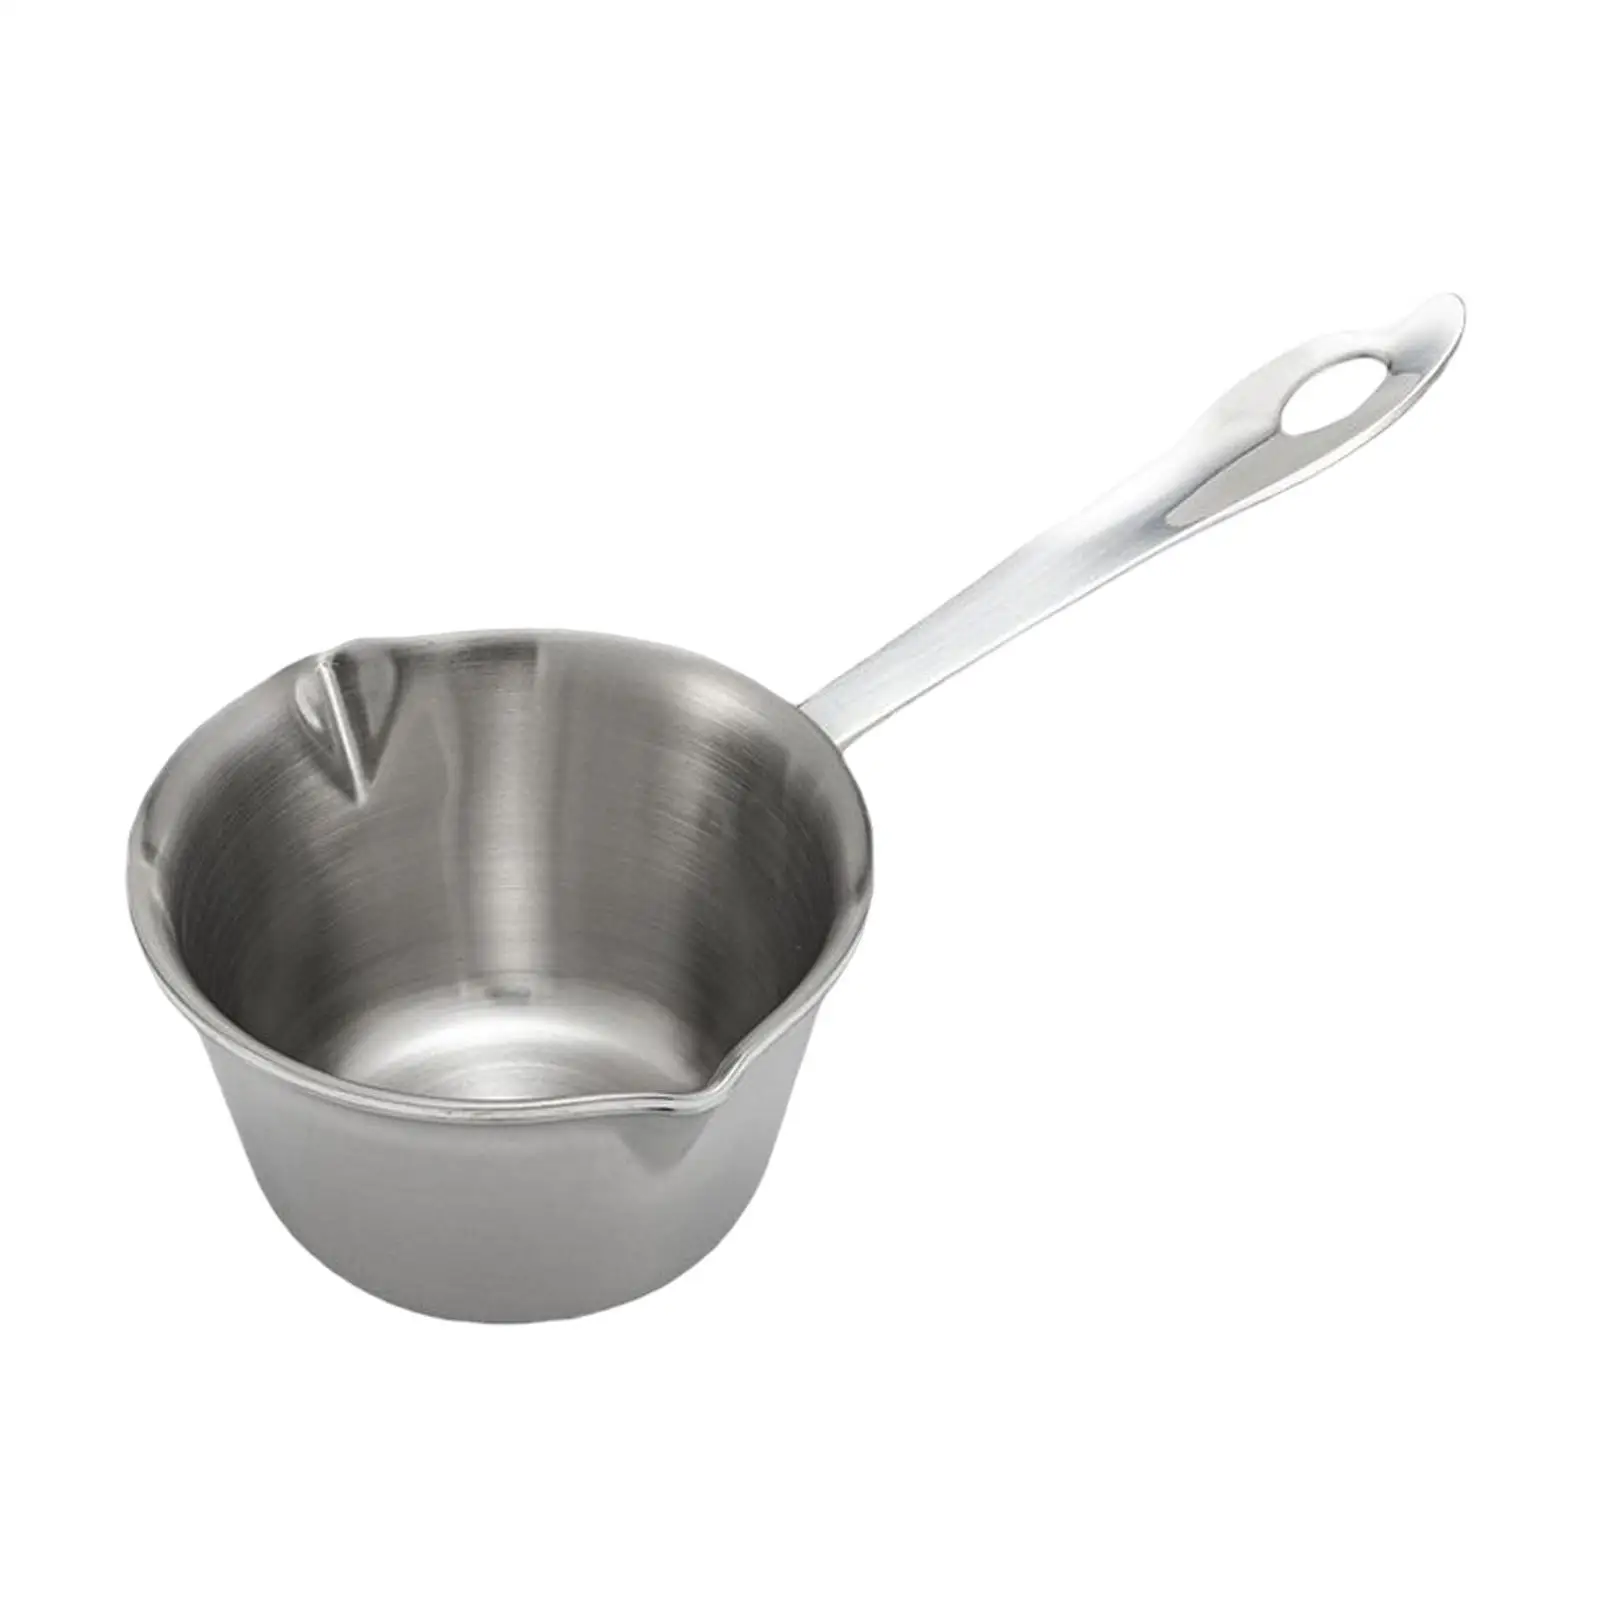 Stainless steel Melting Pot Long Handle Hanging Saucepan Double Spout Coffee Milk Warmer for Breakfast Camping Pasta